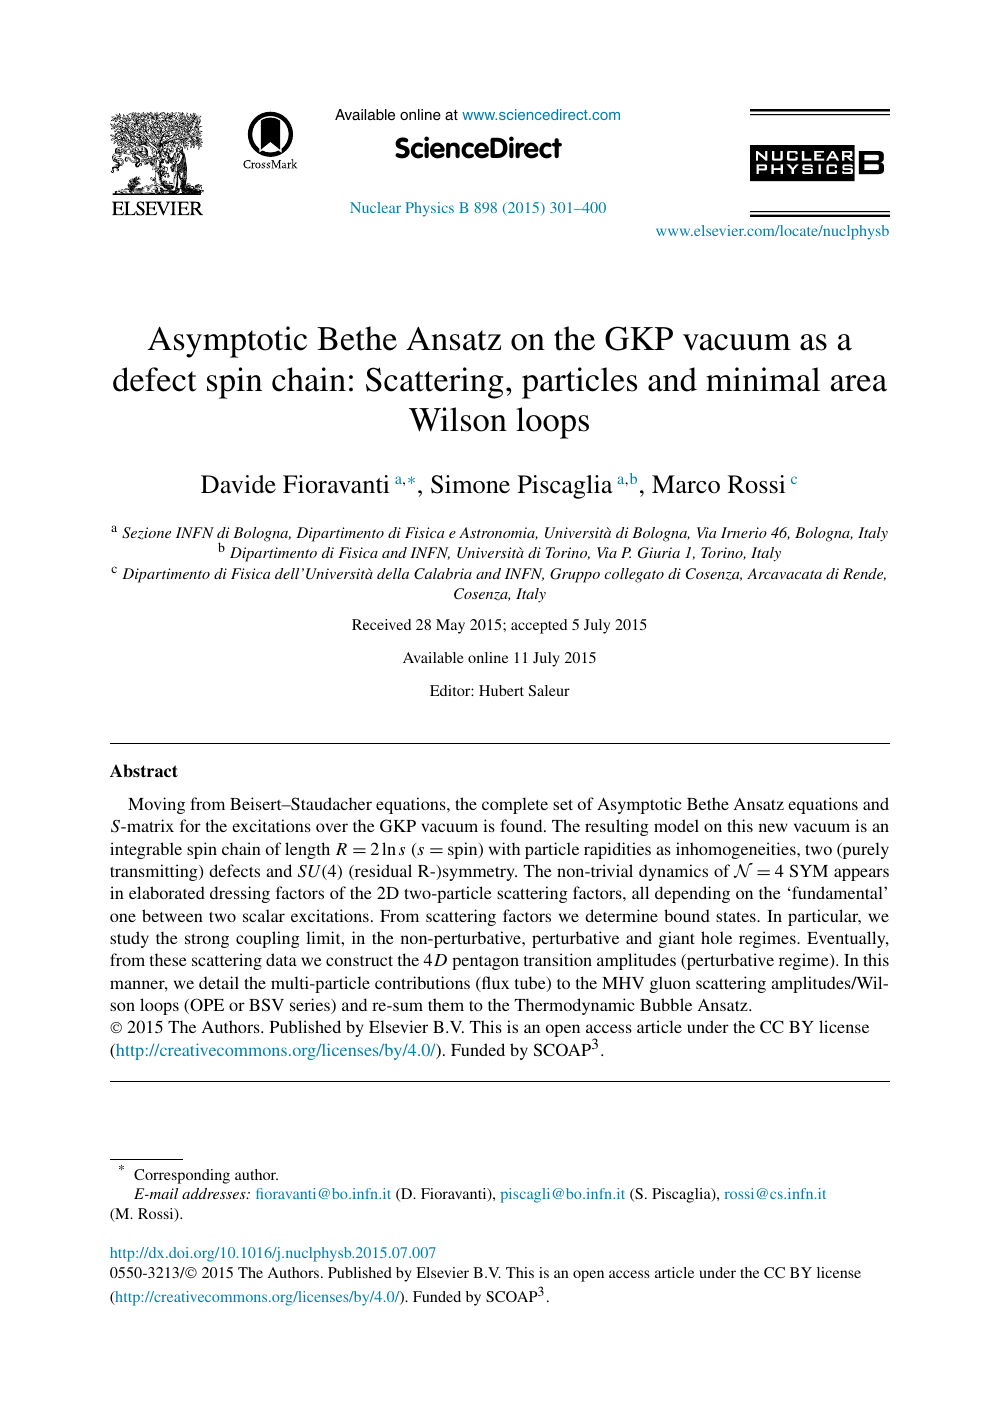 Asymptotic Bethe Ansatz On The Gkp Vacuum As A Defect Spin Chain Scattering Particles And Minimal Area Wilson Loops Topic Of Research Paper In Physical Sciences Download Scholarly Article Pdf And